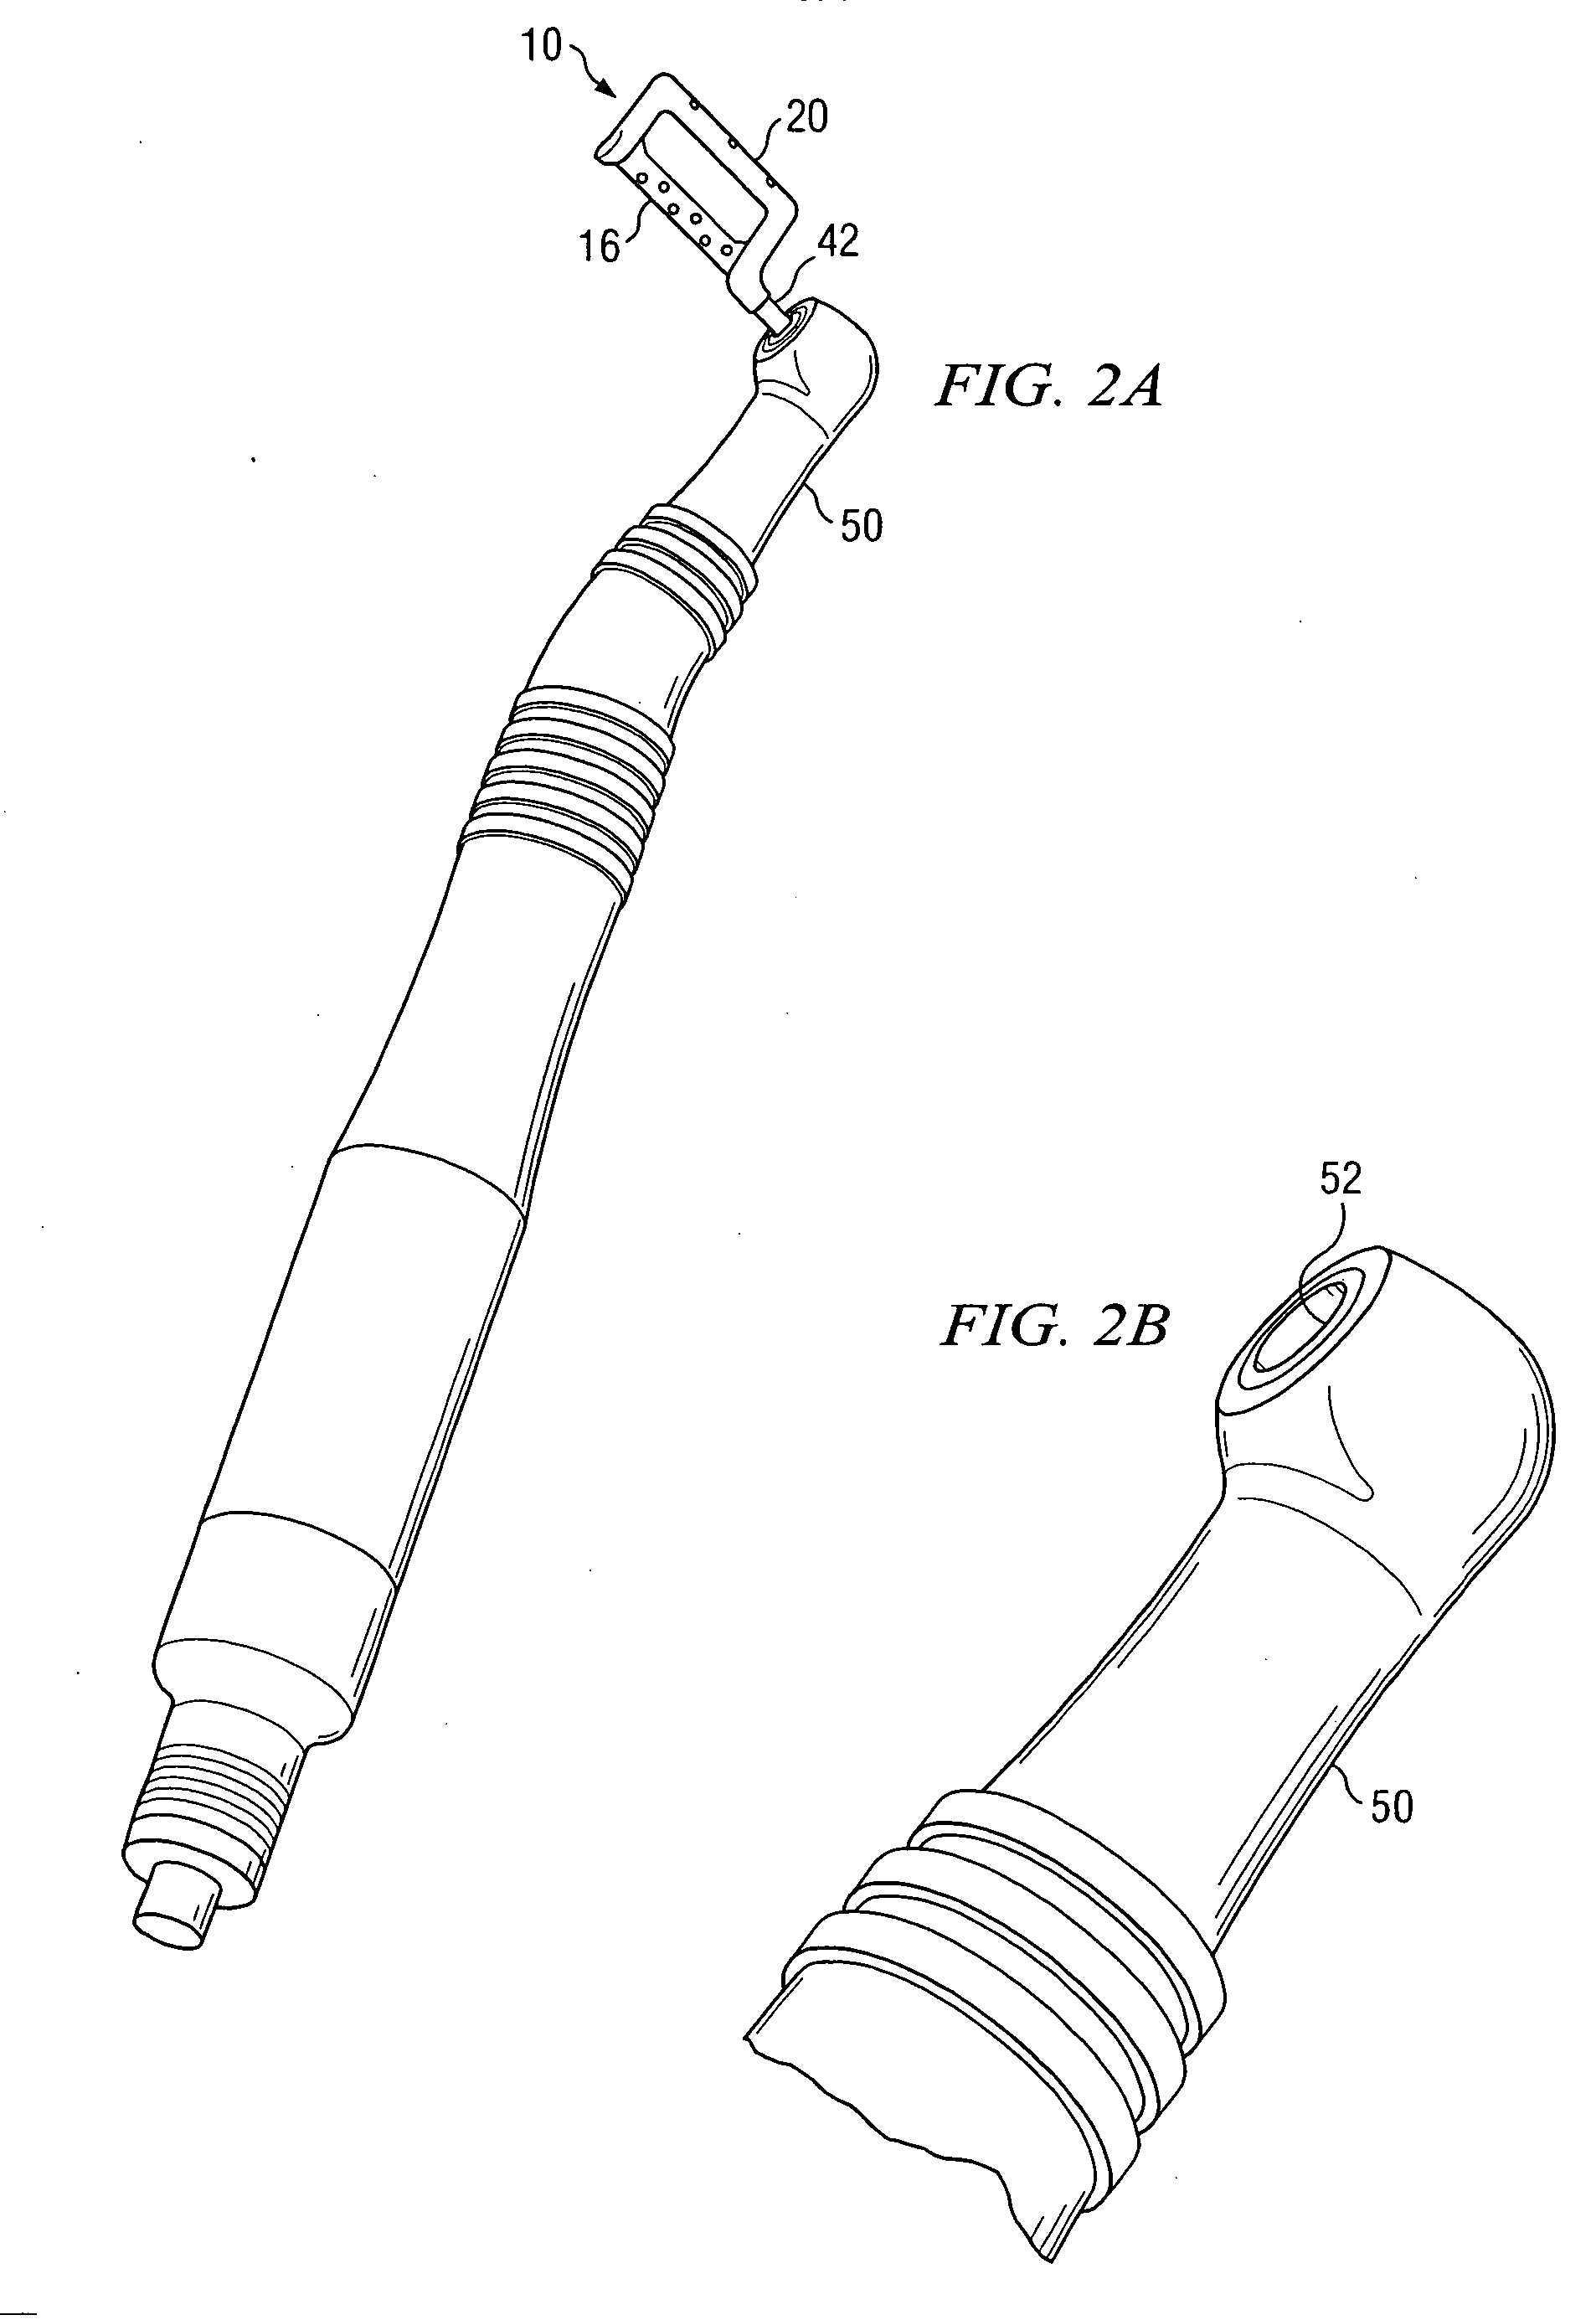 Apparatus and method for removing enamel from a person's tooth